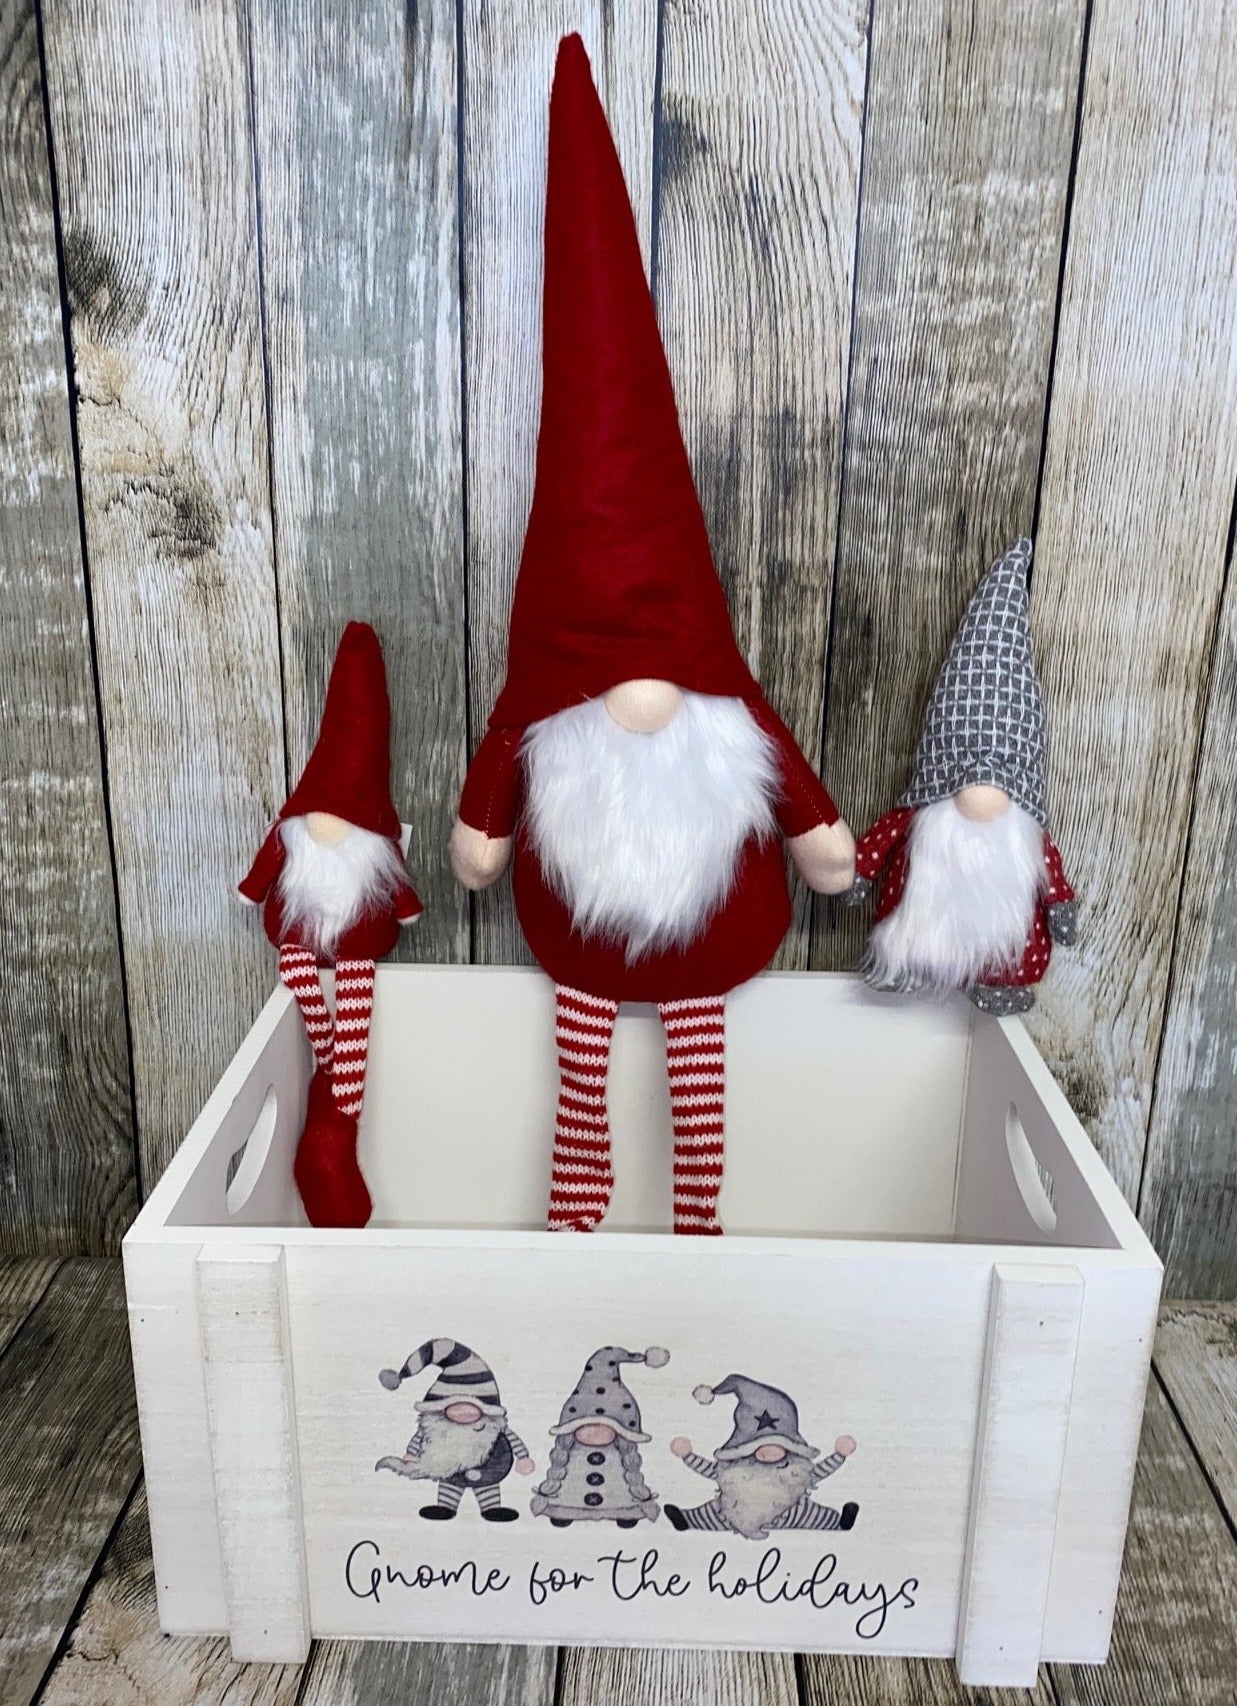 Gnome for the Holidays - Gonk Themed Wooden Decorative Crate - Kate's Cupboard